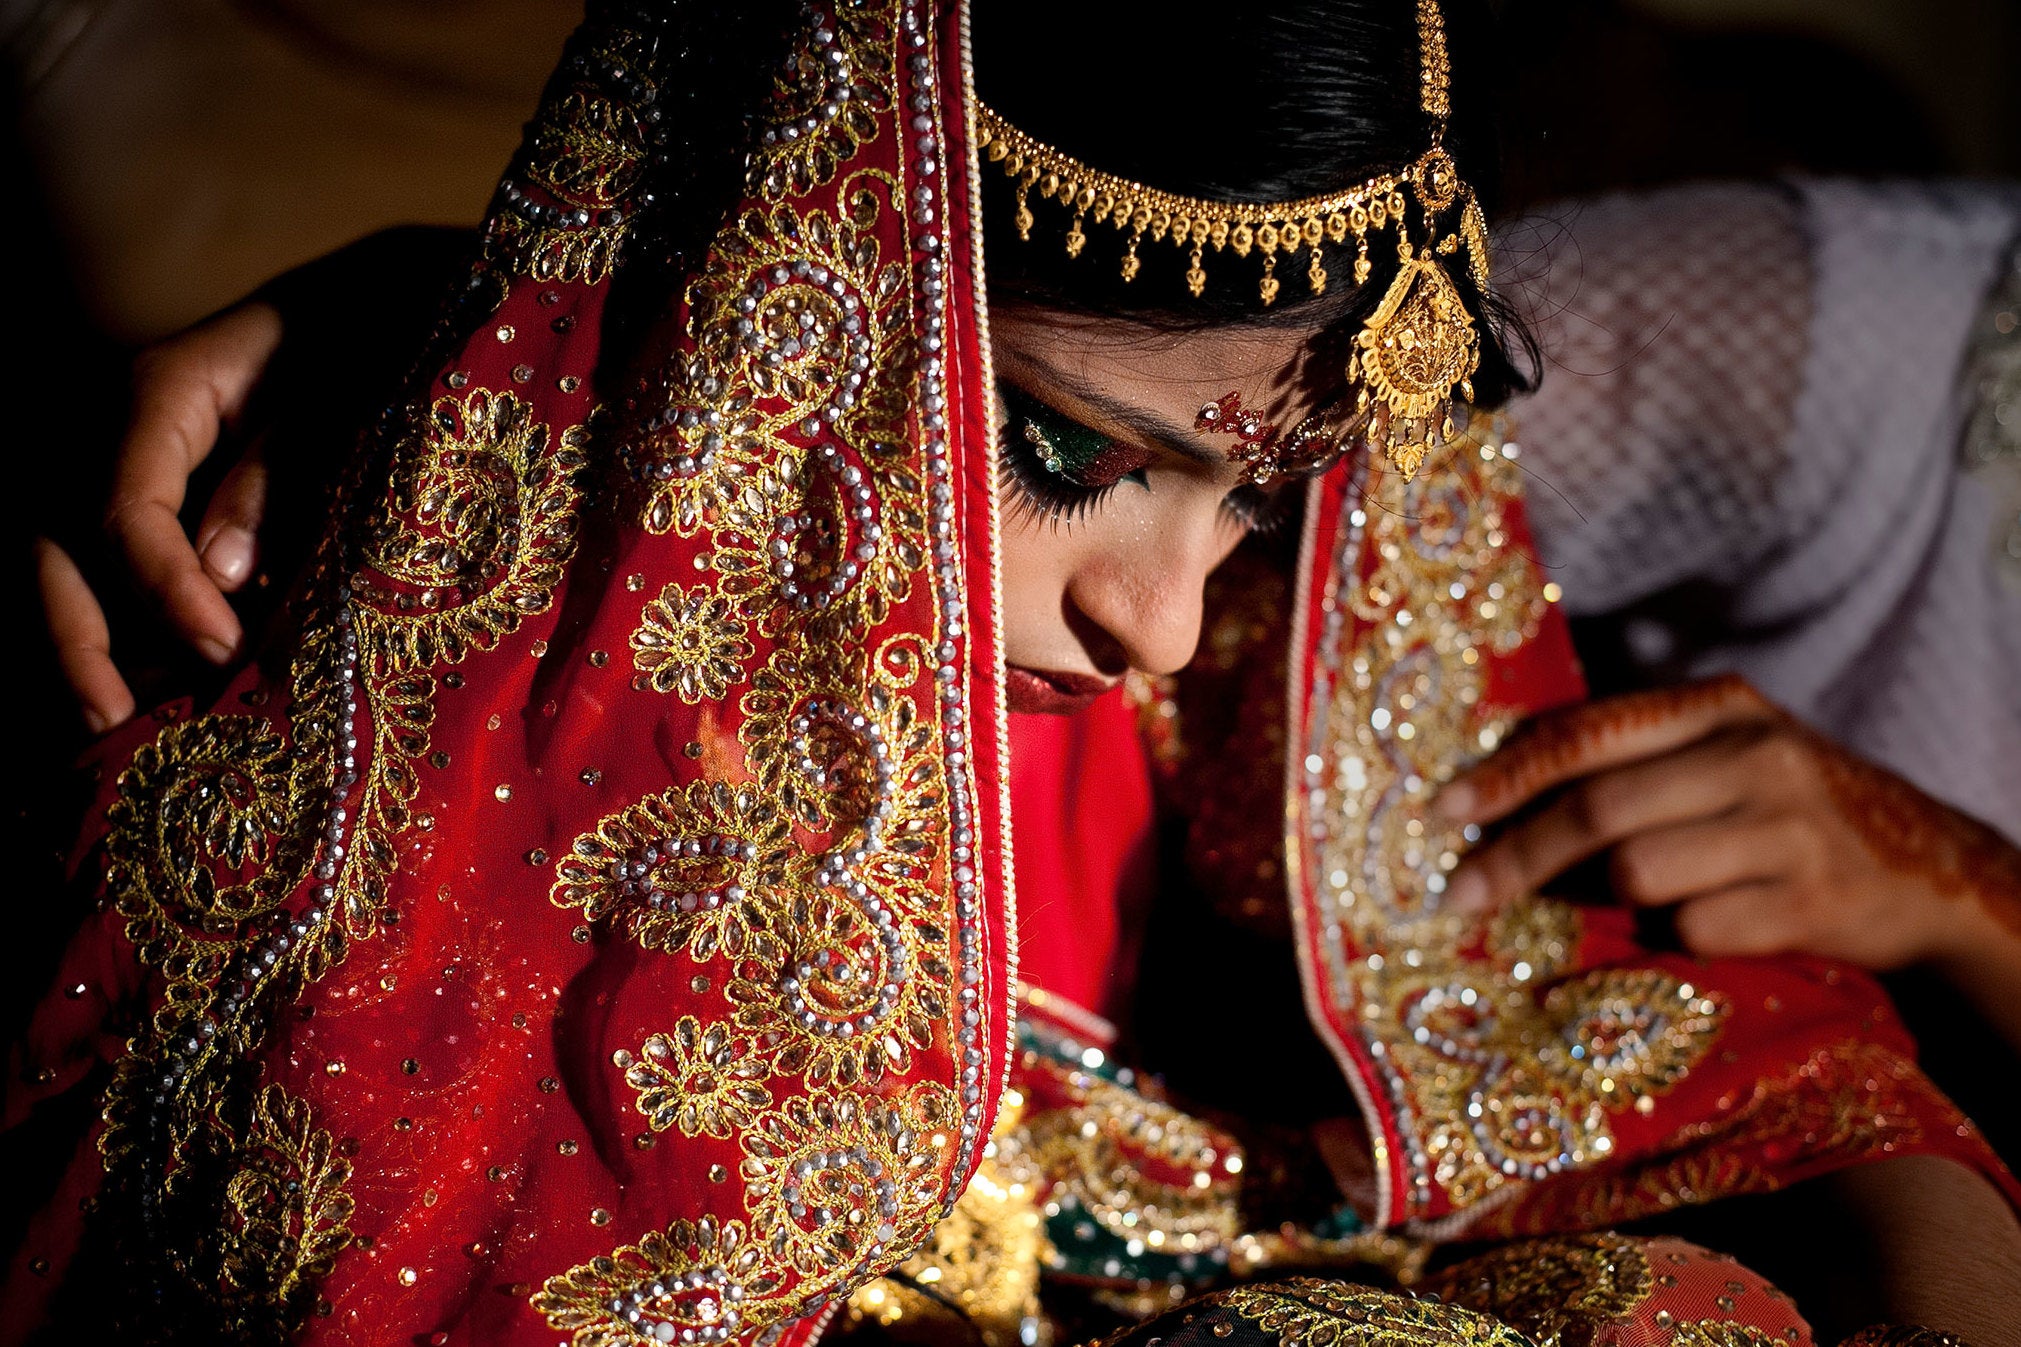 Bangladesh child marriage New law will reduce minimum marital age to zero The Independent The Independent photo image